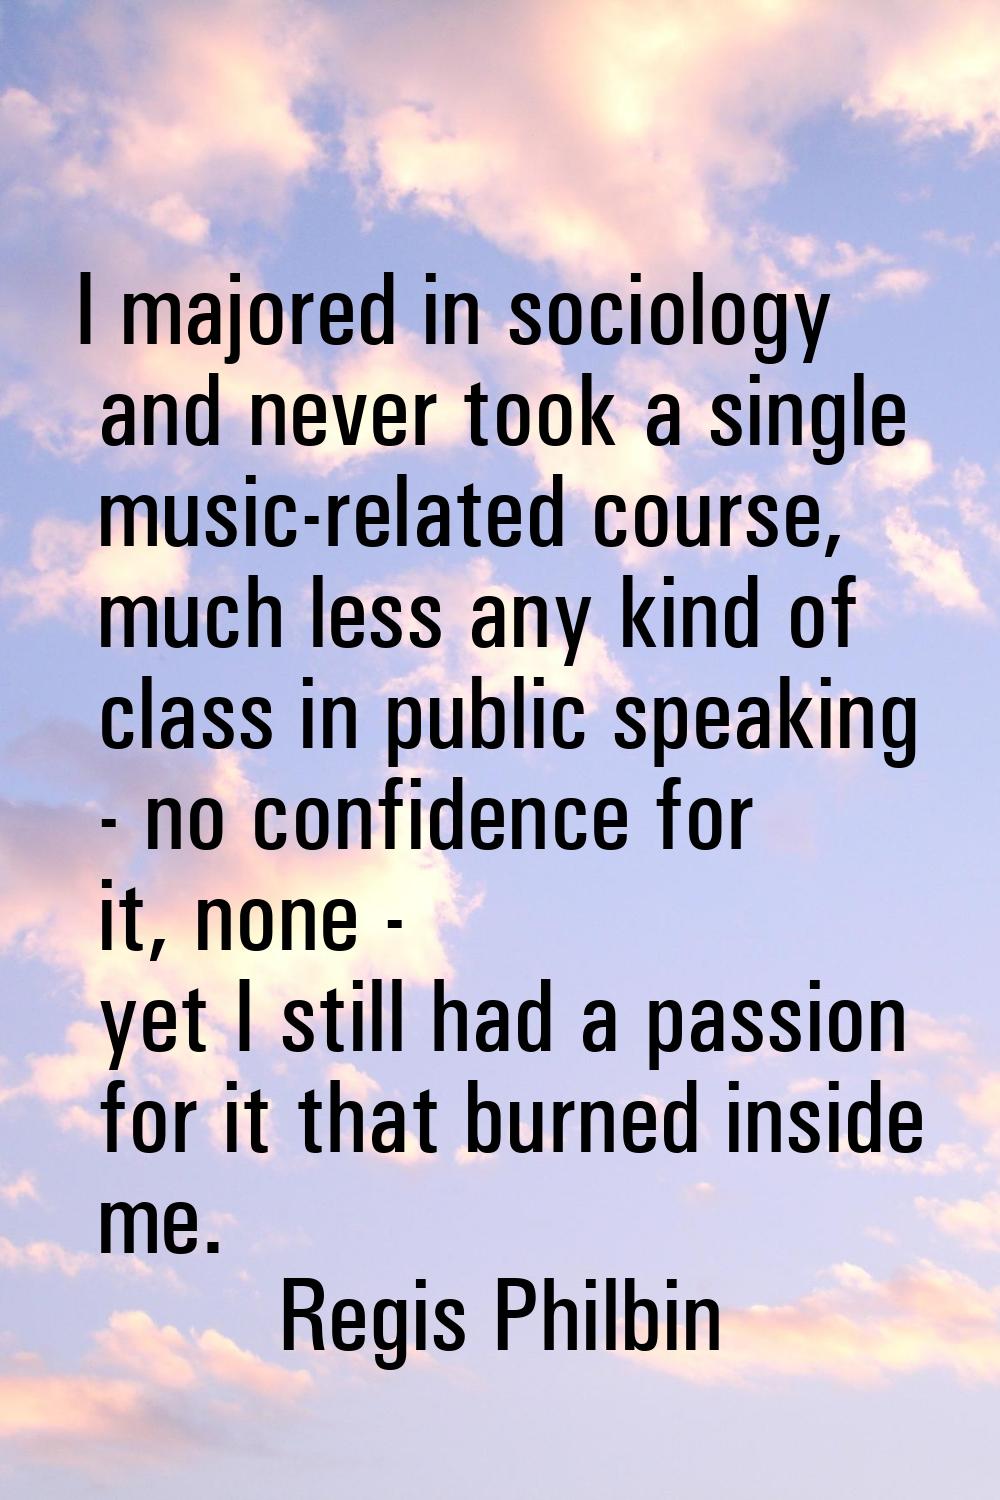 I majored in sociology and never took a single music-related course, much less any kind of class in